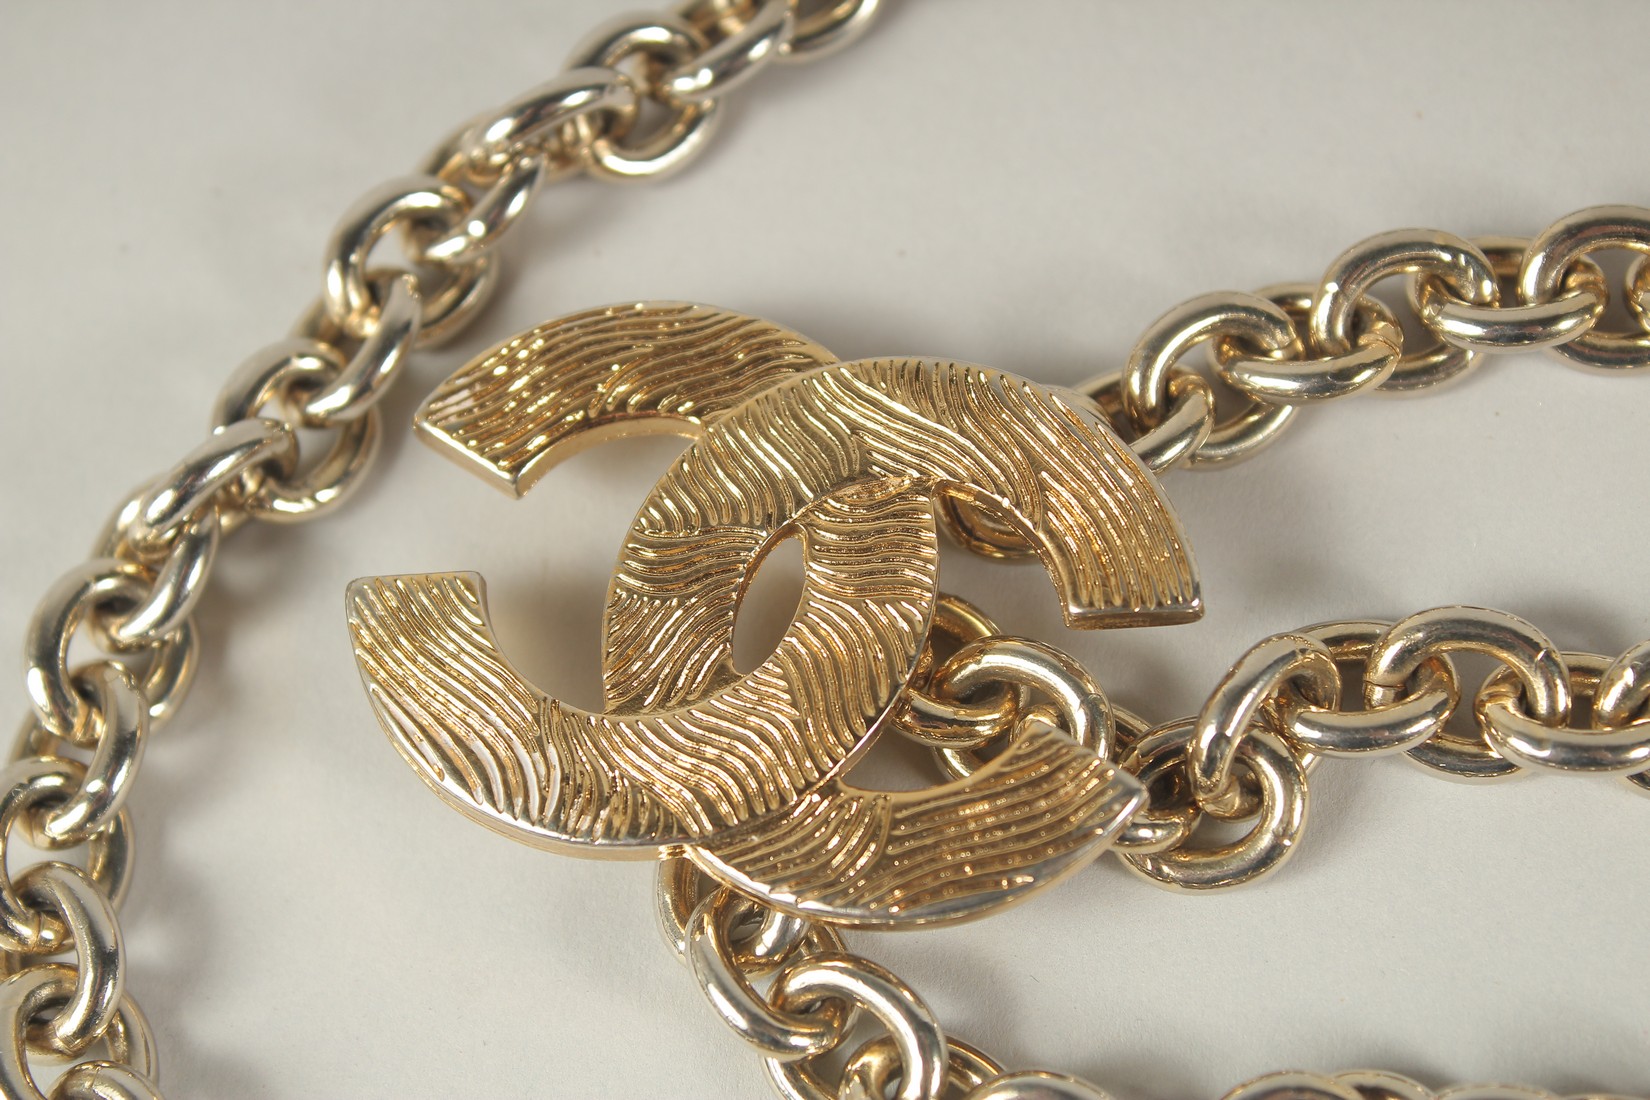 A LONG CHANEL GILT BELT with pendant and tie, double C emblem. 110cms long. - Image 2 of 9